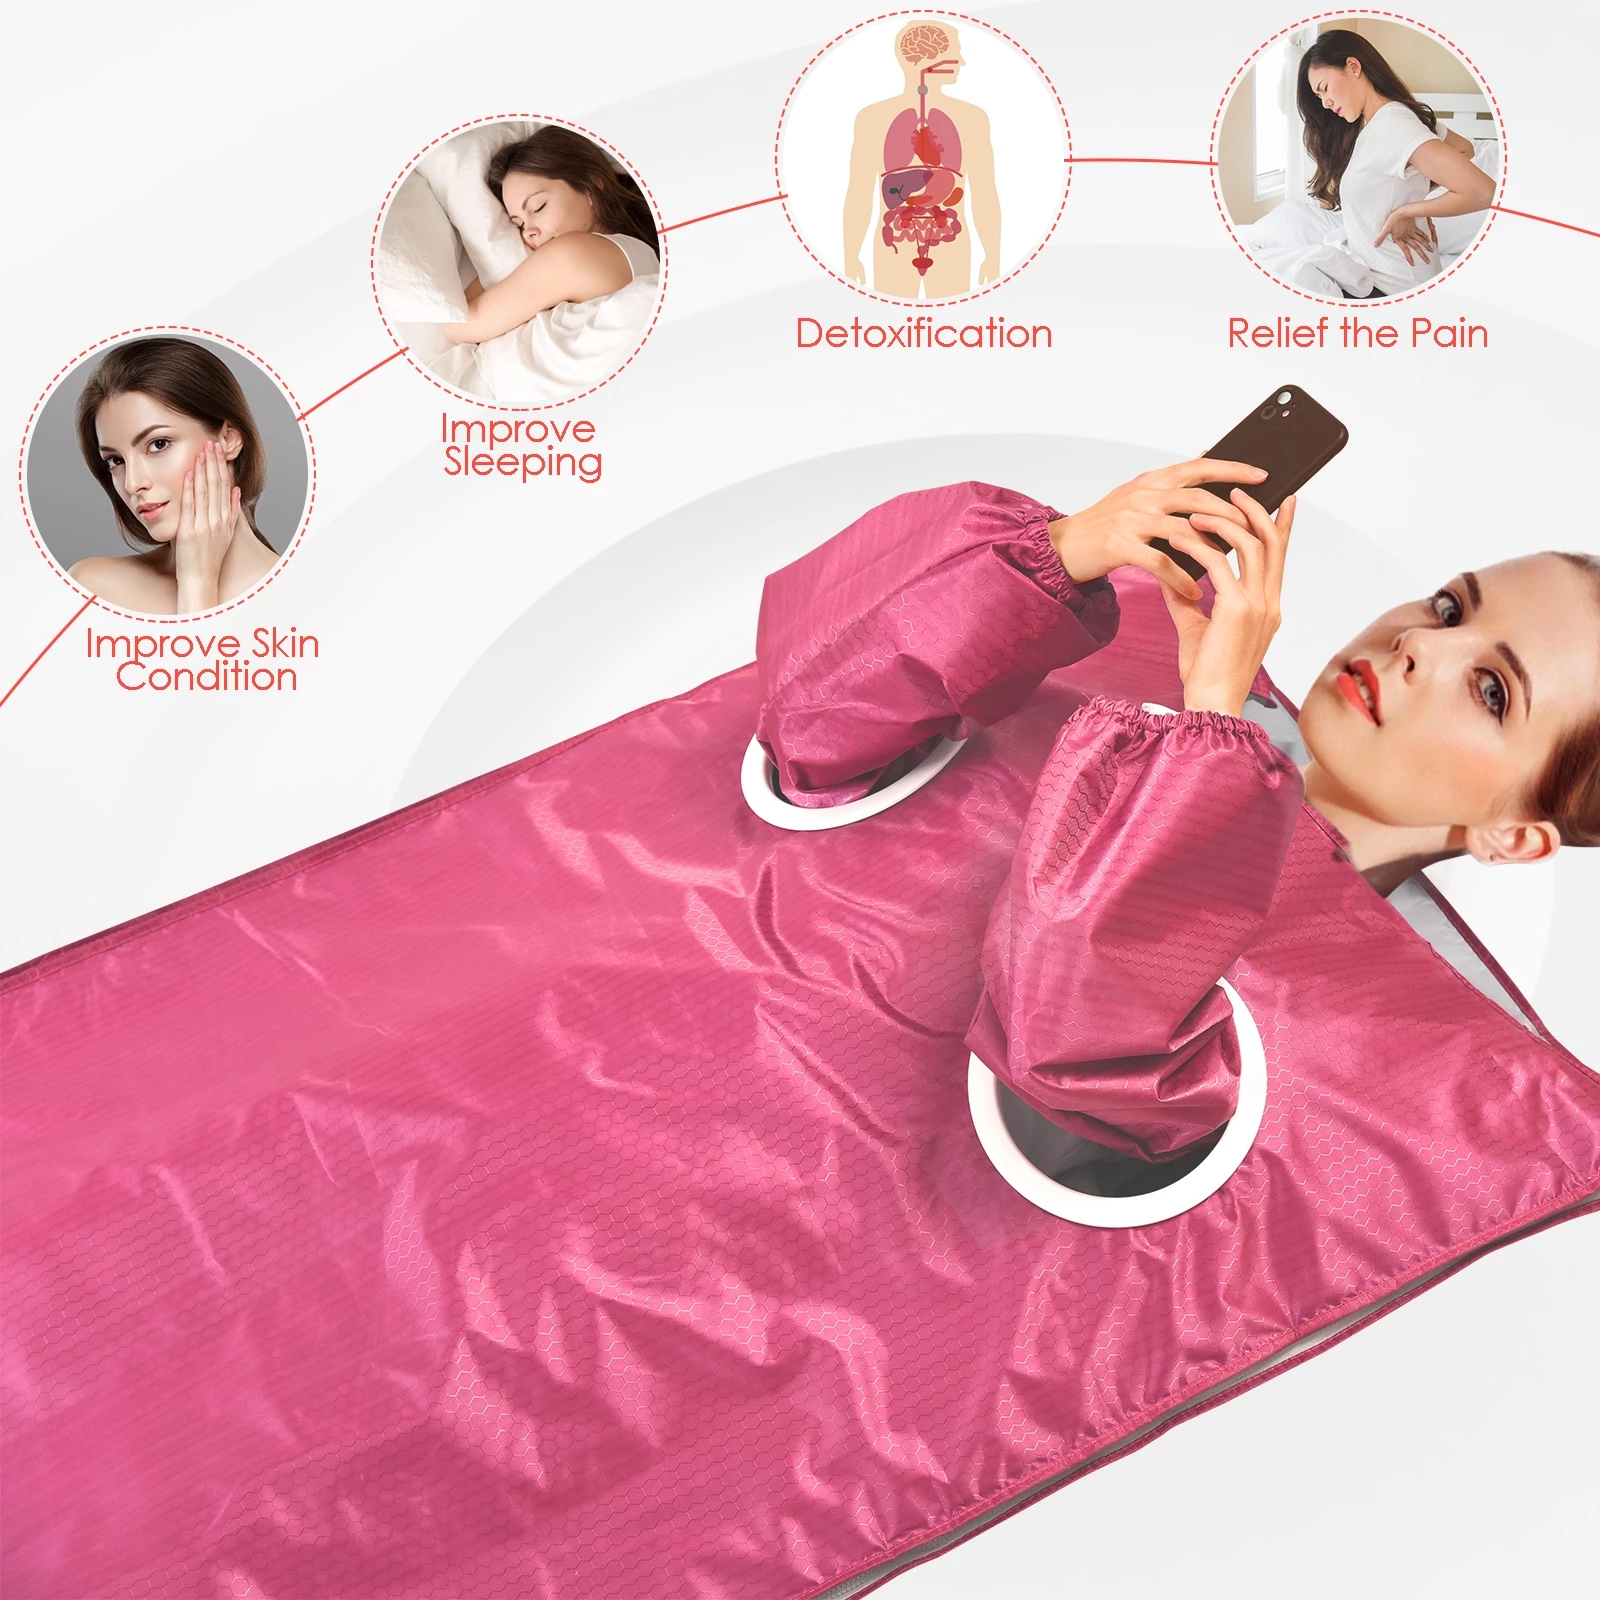 Infrared sauna lymphatic drainage massage slimming equipment heat thermal pressotherapy machine body wrap blanket With 2 sleeves